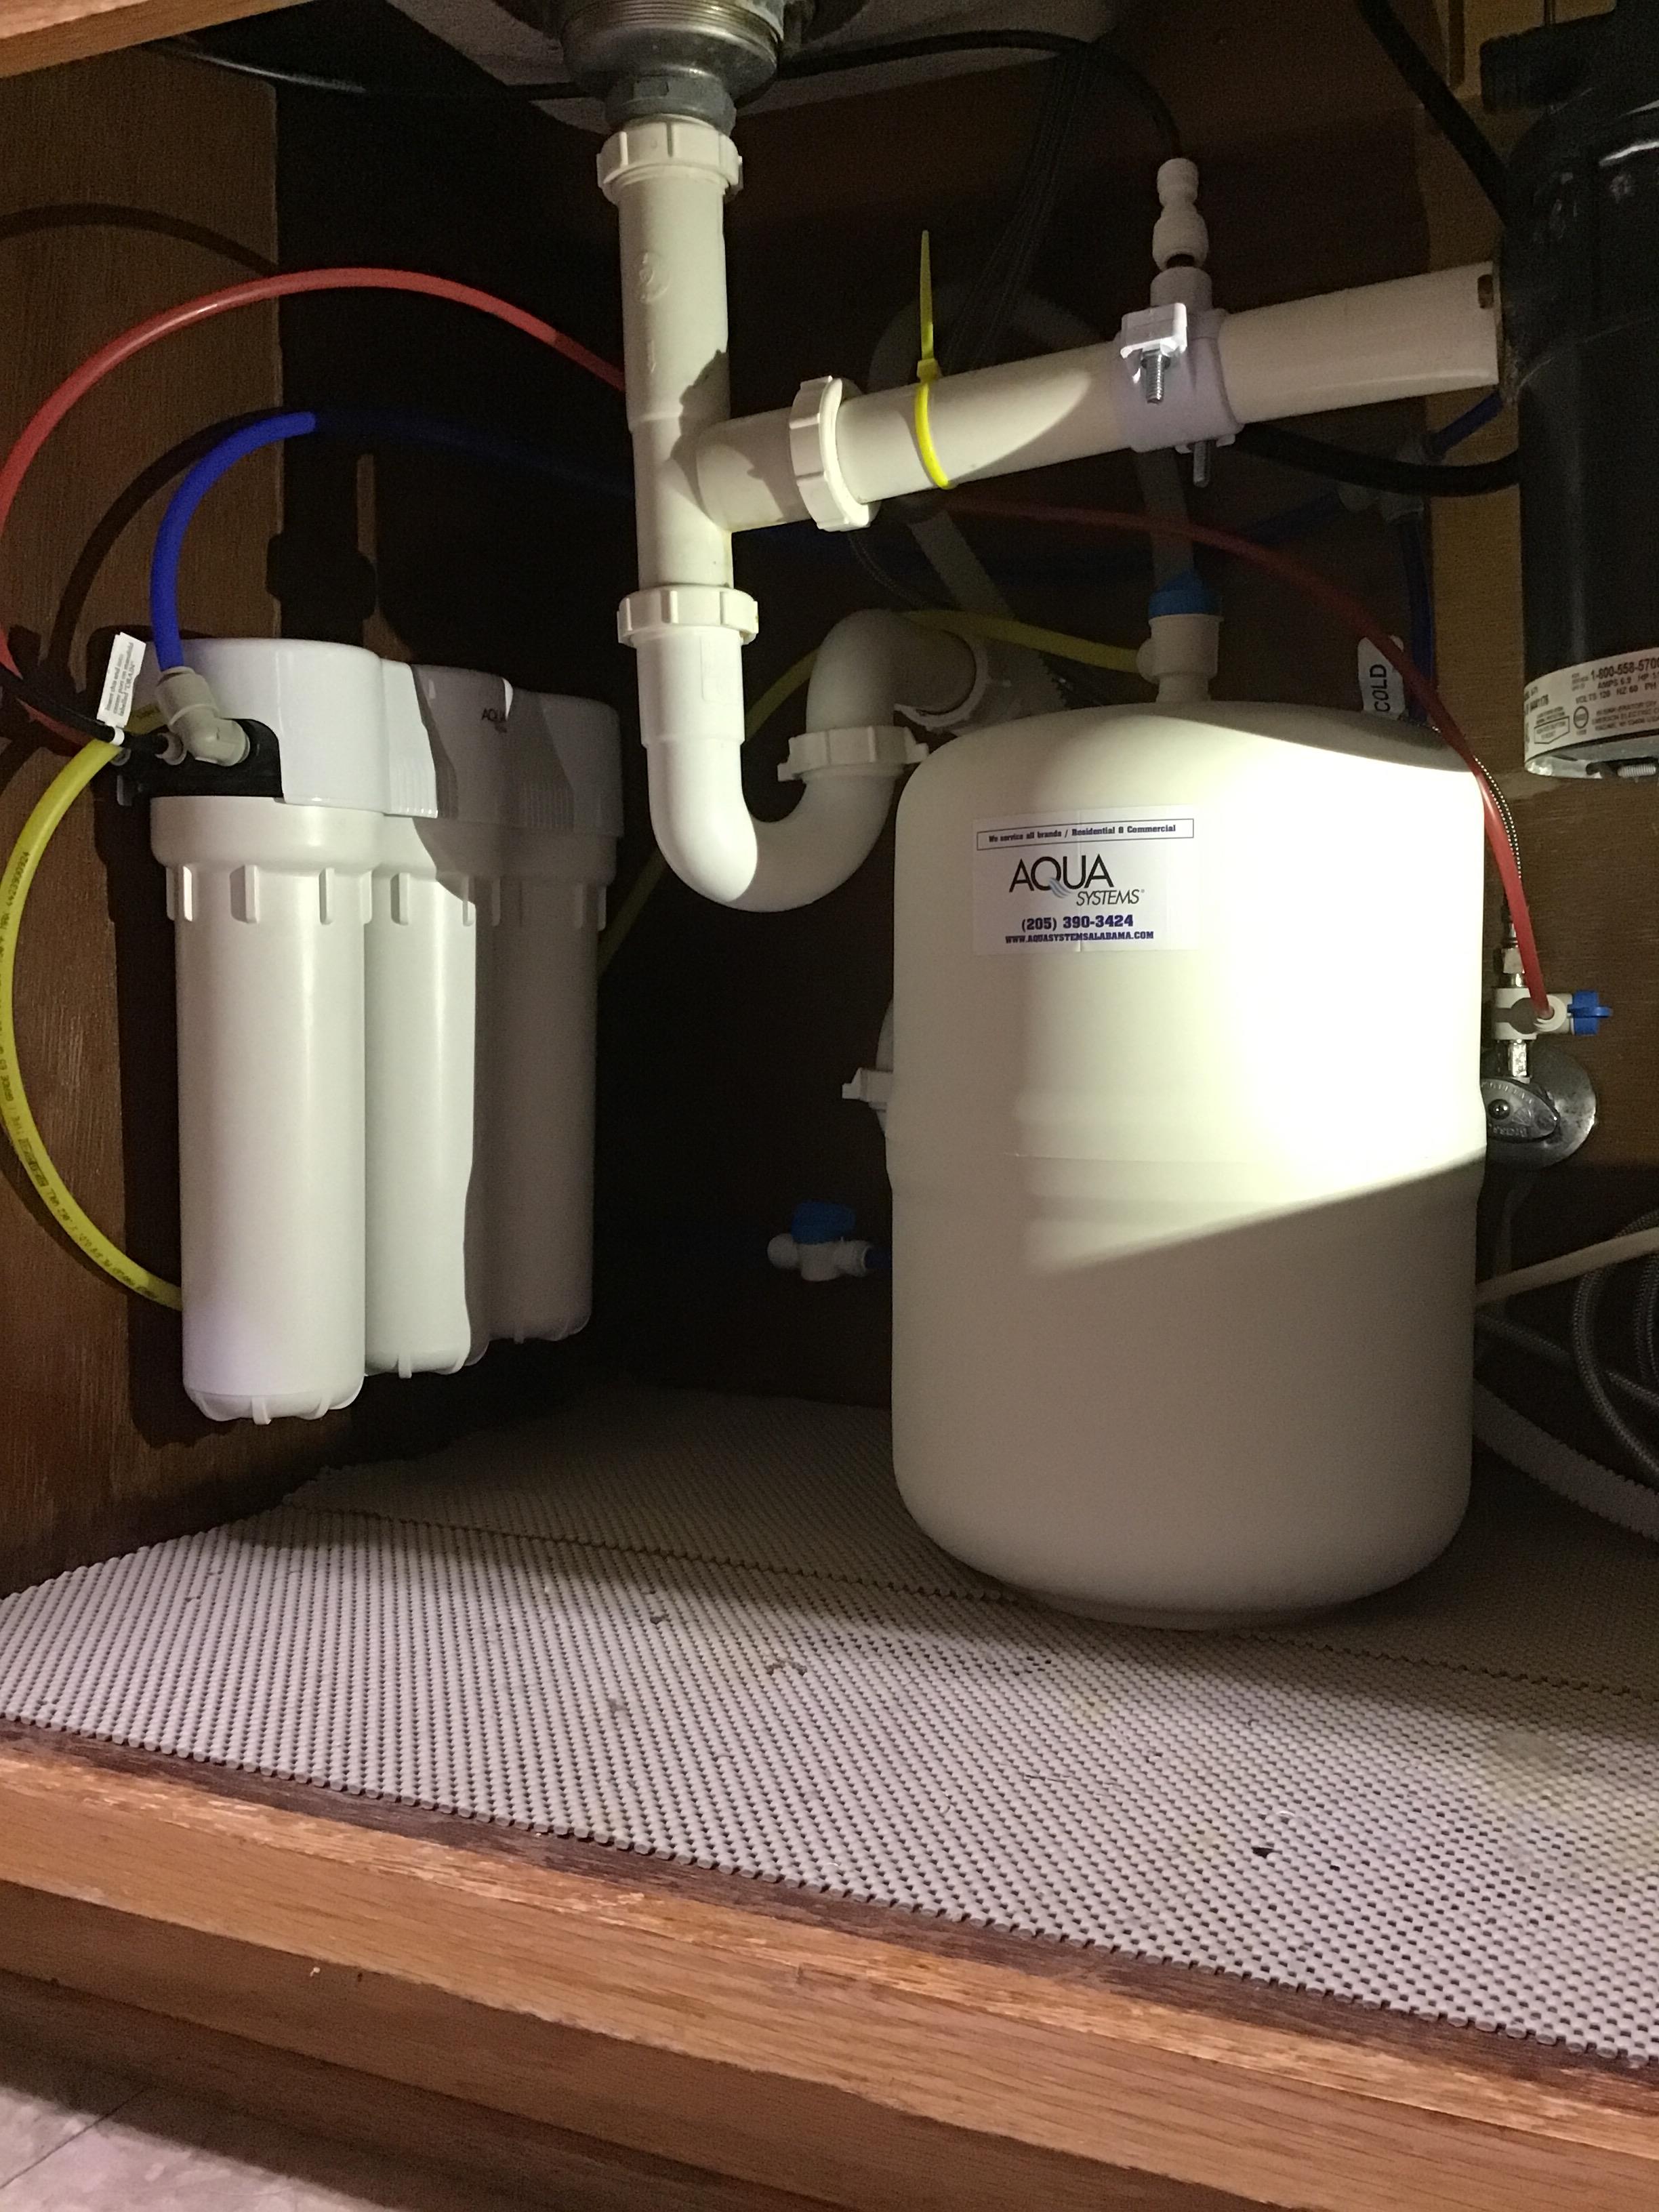 RO WATER
REVERSE OSMOSIS WATER
WATER FILTER
IN HOME WATER FILTER
